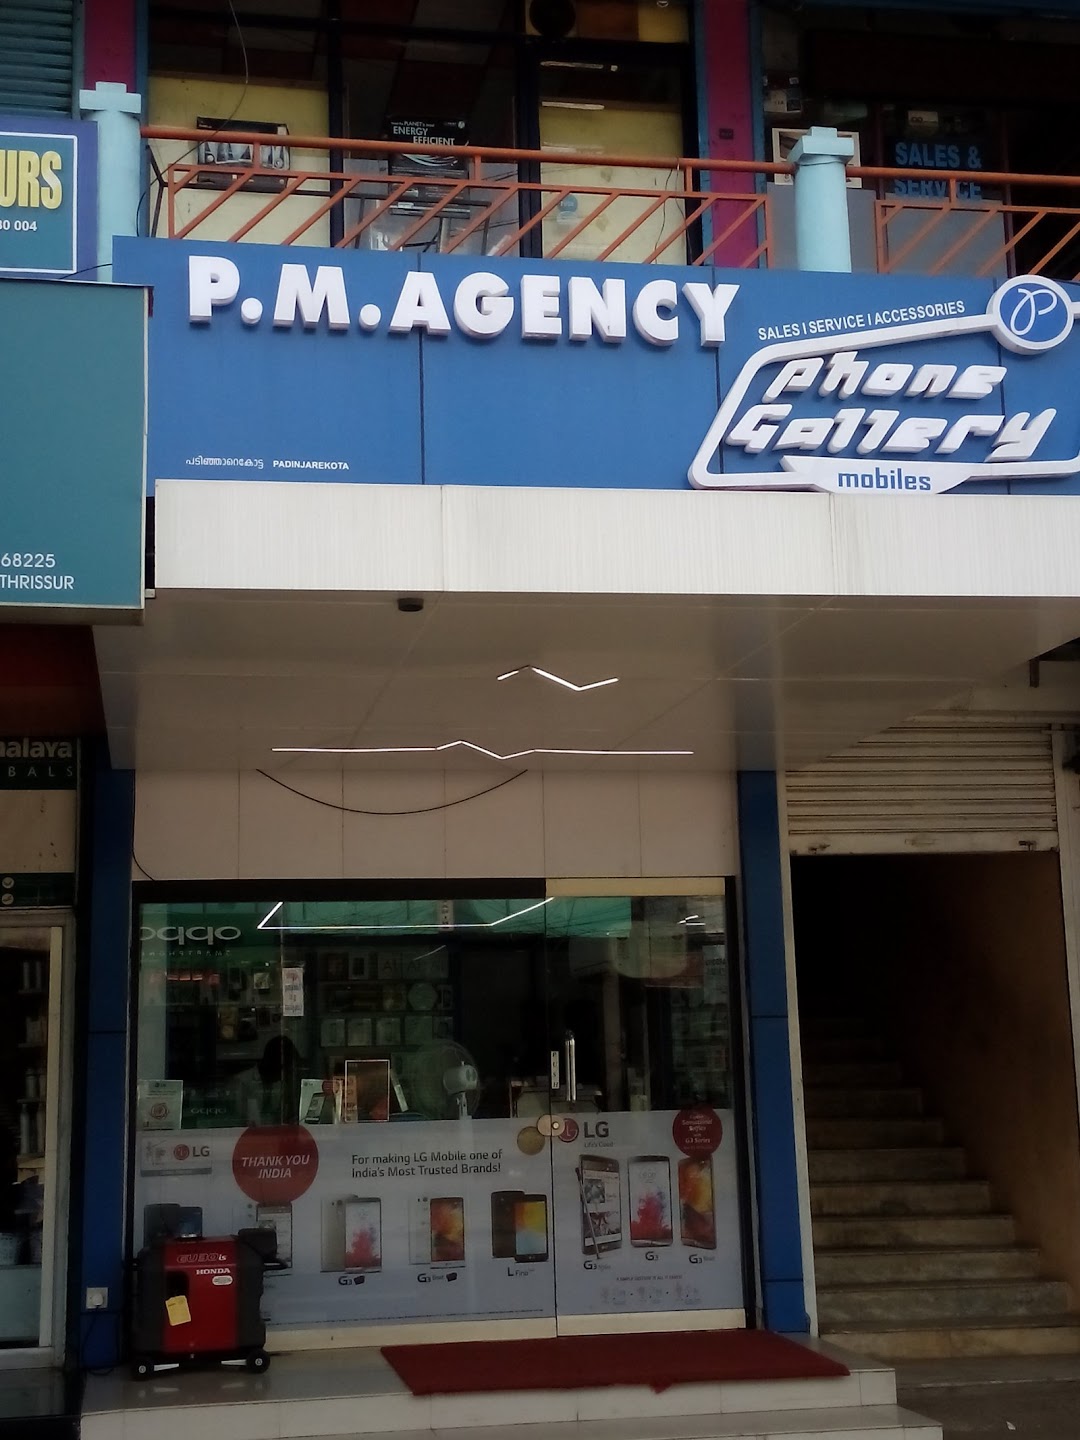 Phone Gallery Pm Agency In The City Thrissur